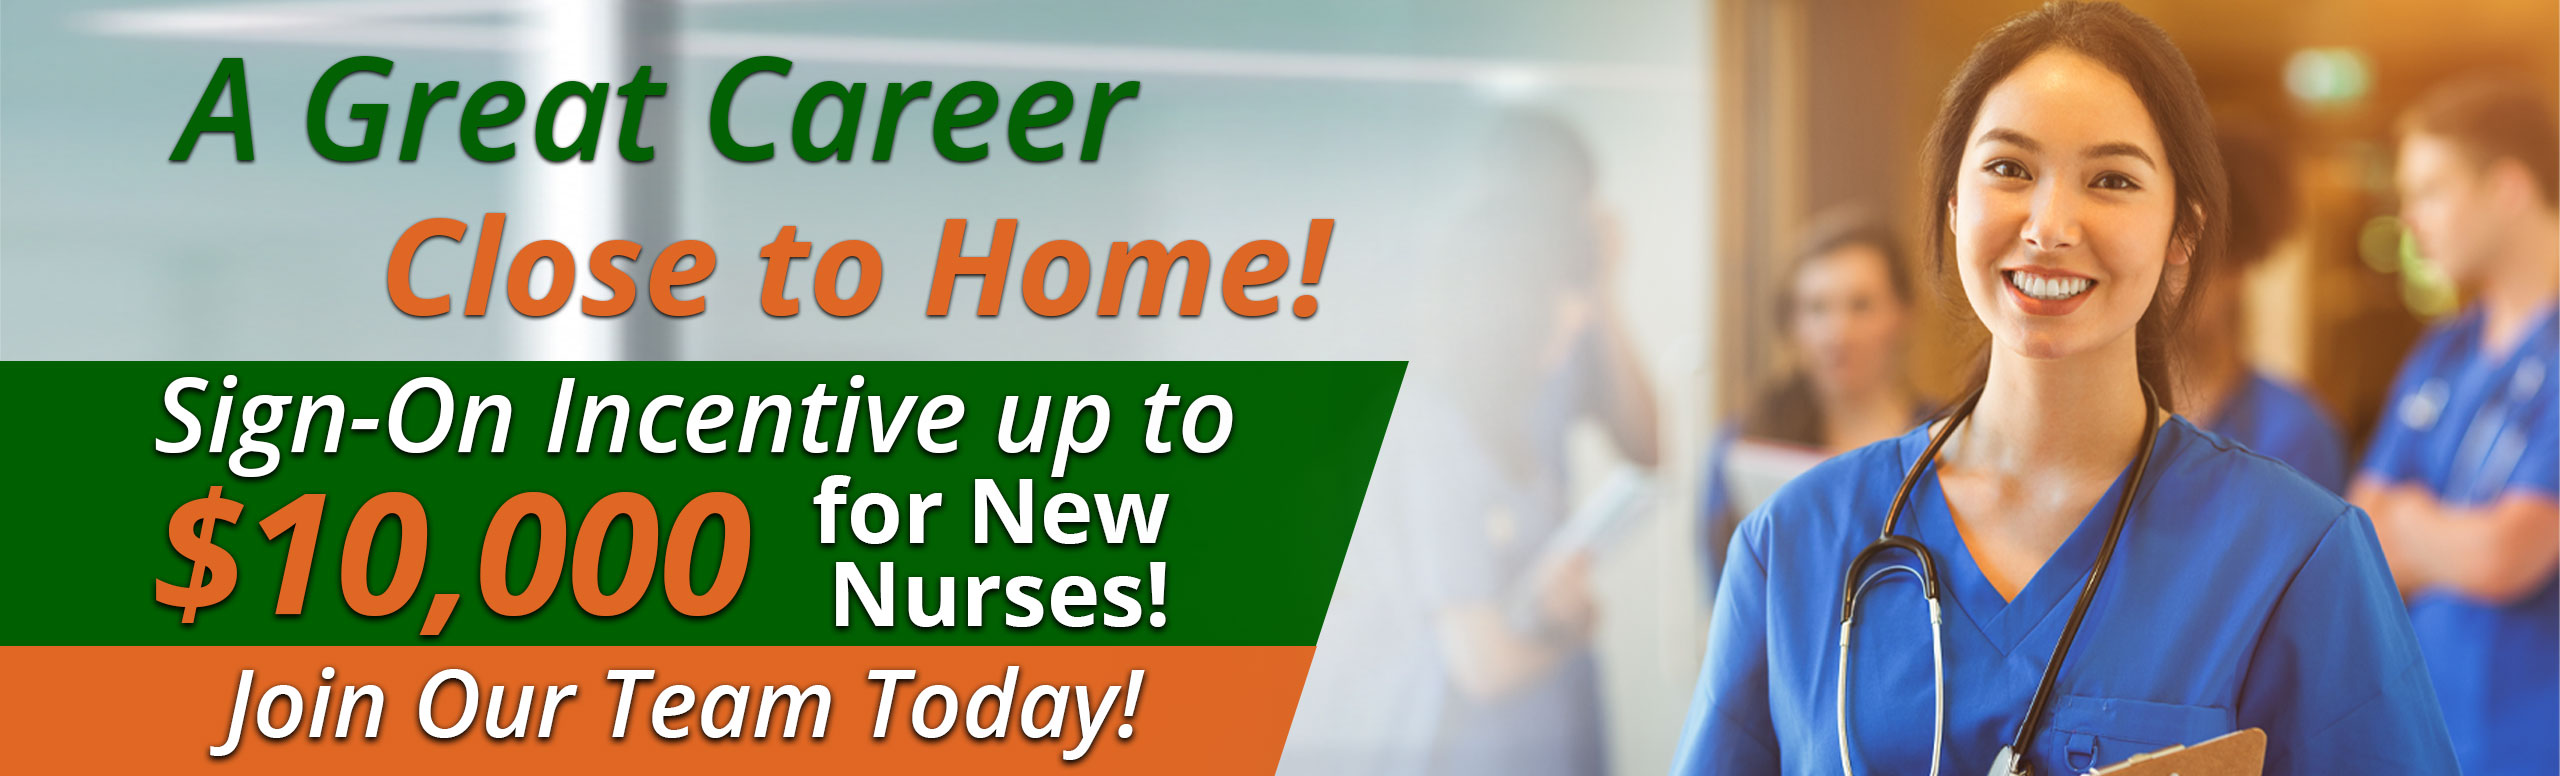 Banner picture of a female Nurse smiling. She is holding a clipboard and wearing a stethoscope around her neck. There is Nurses (males and females) standing behind of her in a circle talking. Banner says:

A Great Career Close to Home!
Sign-On Bonuses up to $10,000 for New Nurses!
Join Our Team Today!